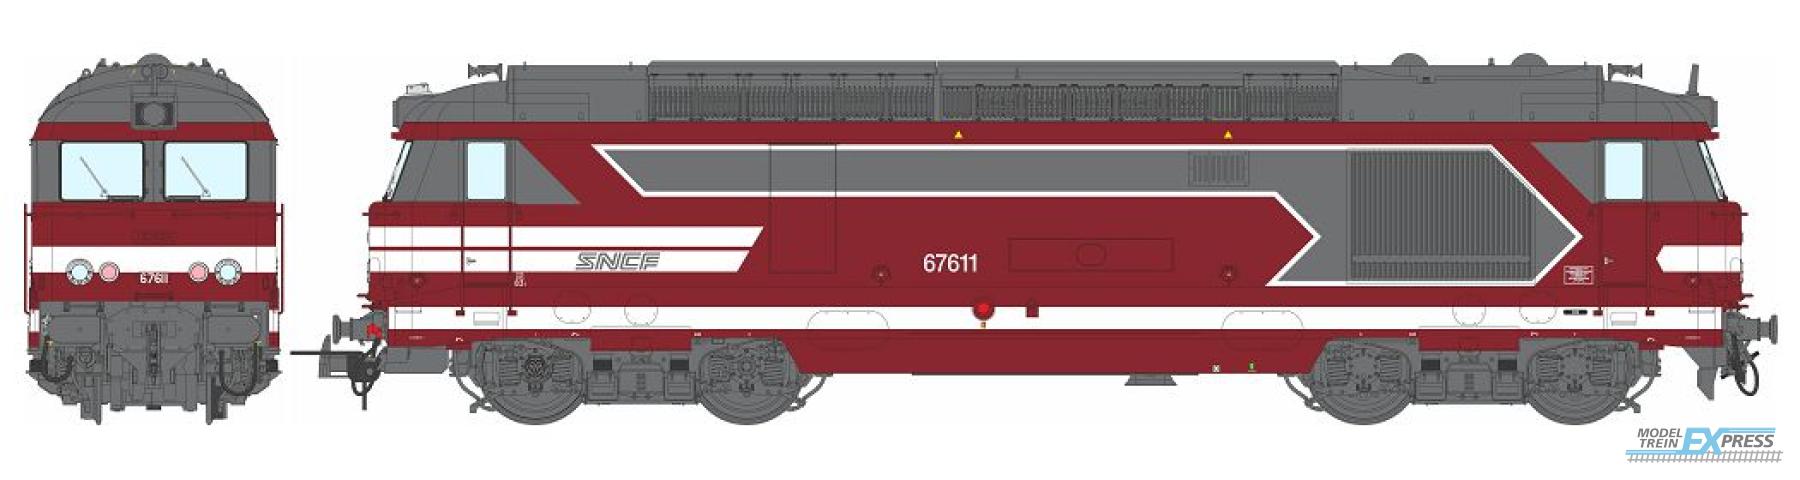 REE models MB-171S BB 67611 RED "CAPITOLE" Era VI - DCC SOUND and Smoke